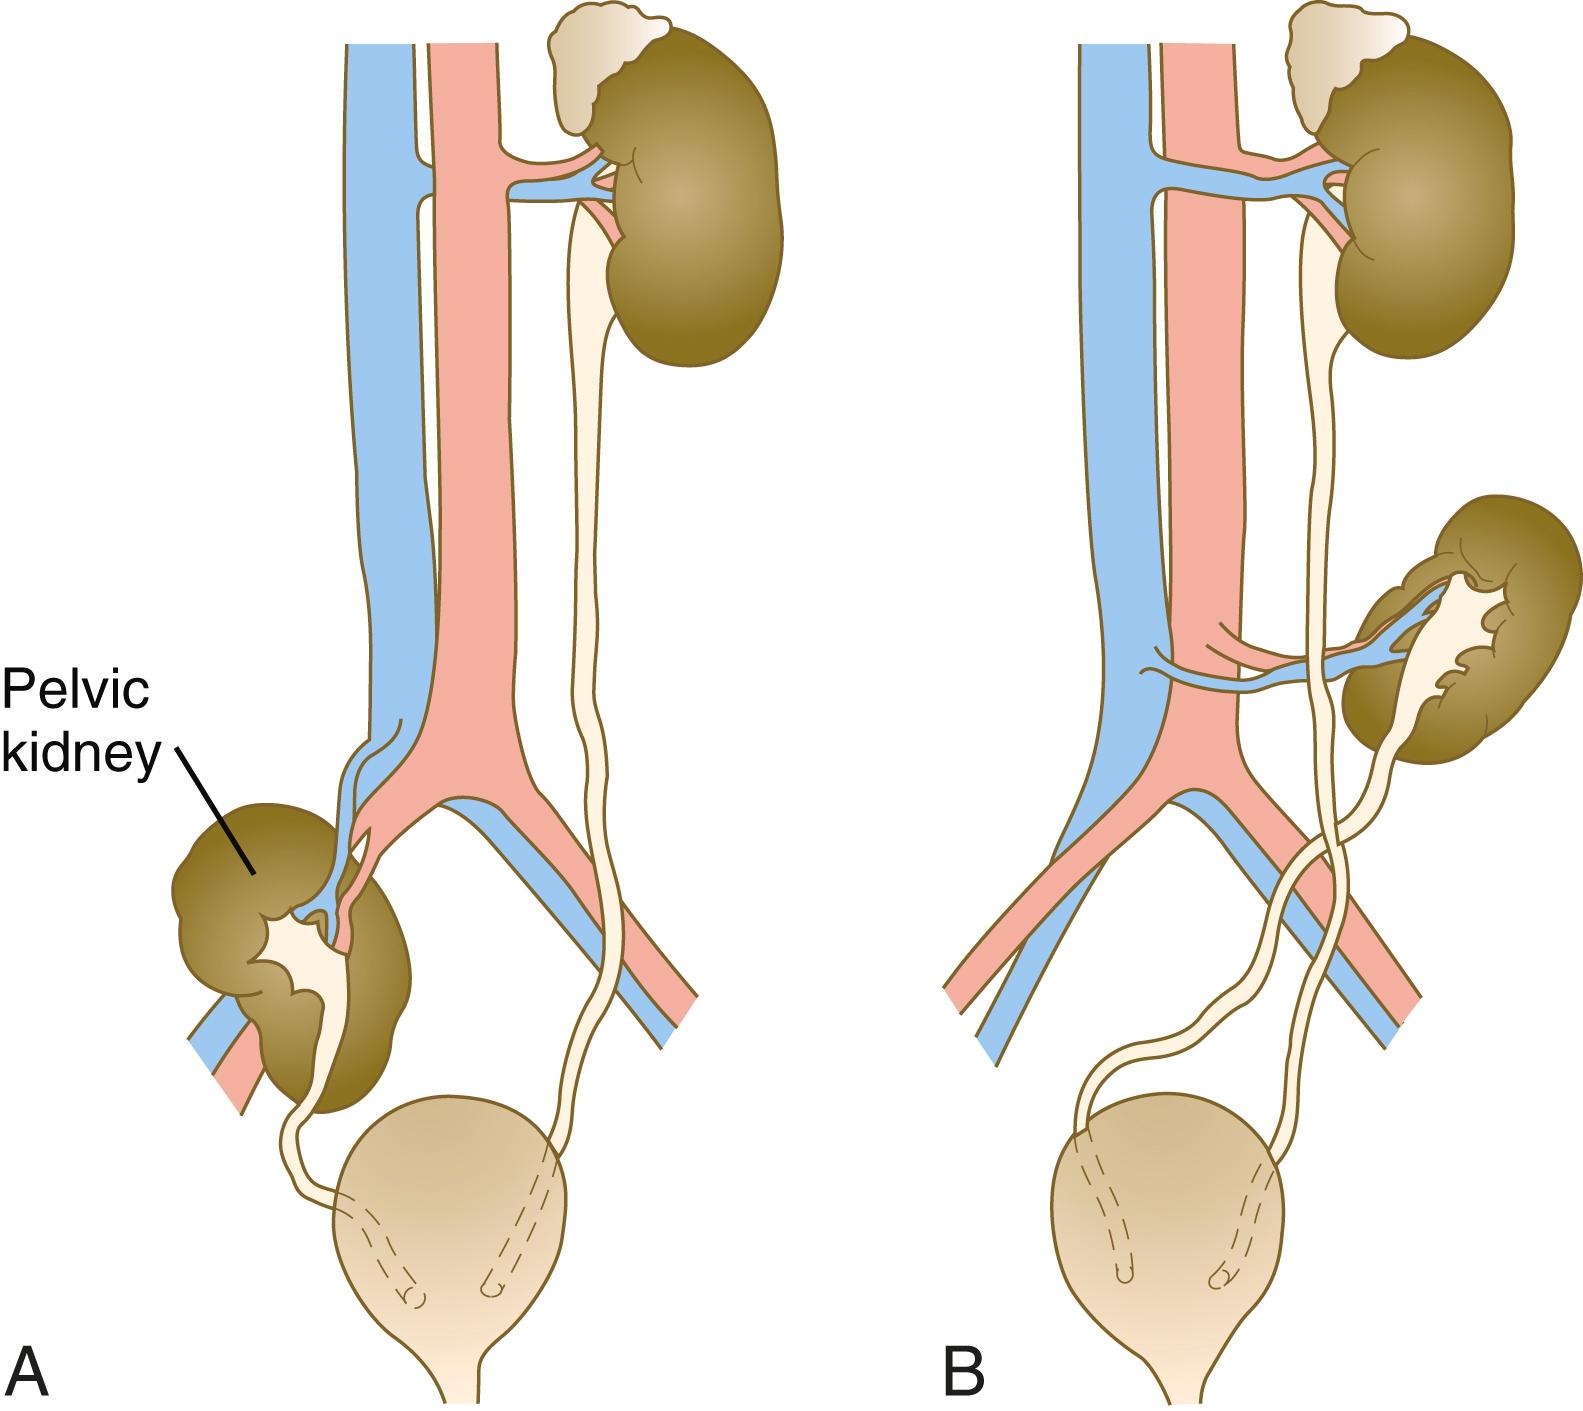 Fig. 16.17, Migration defects of the kidney.